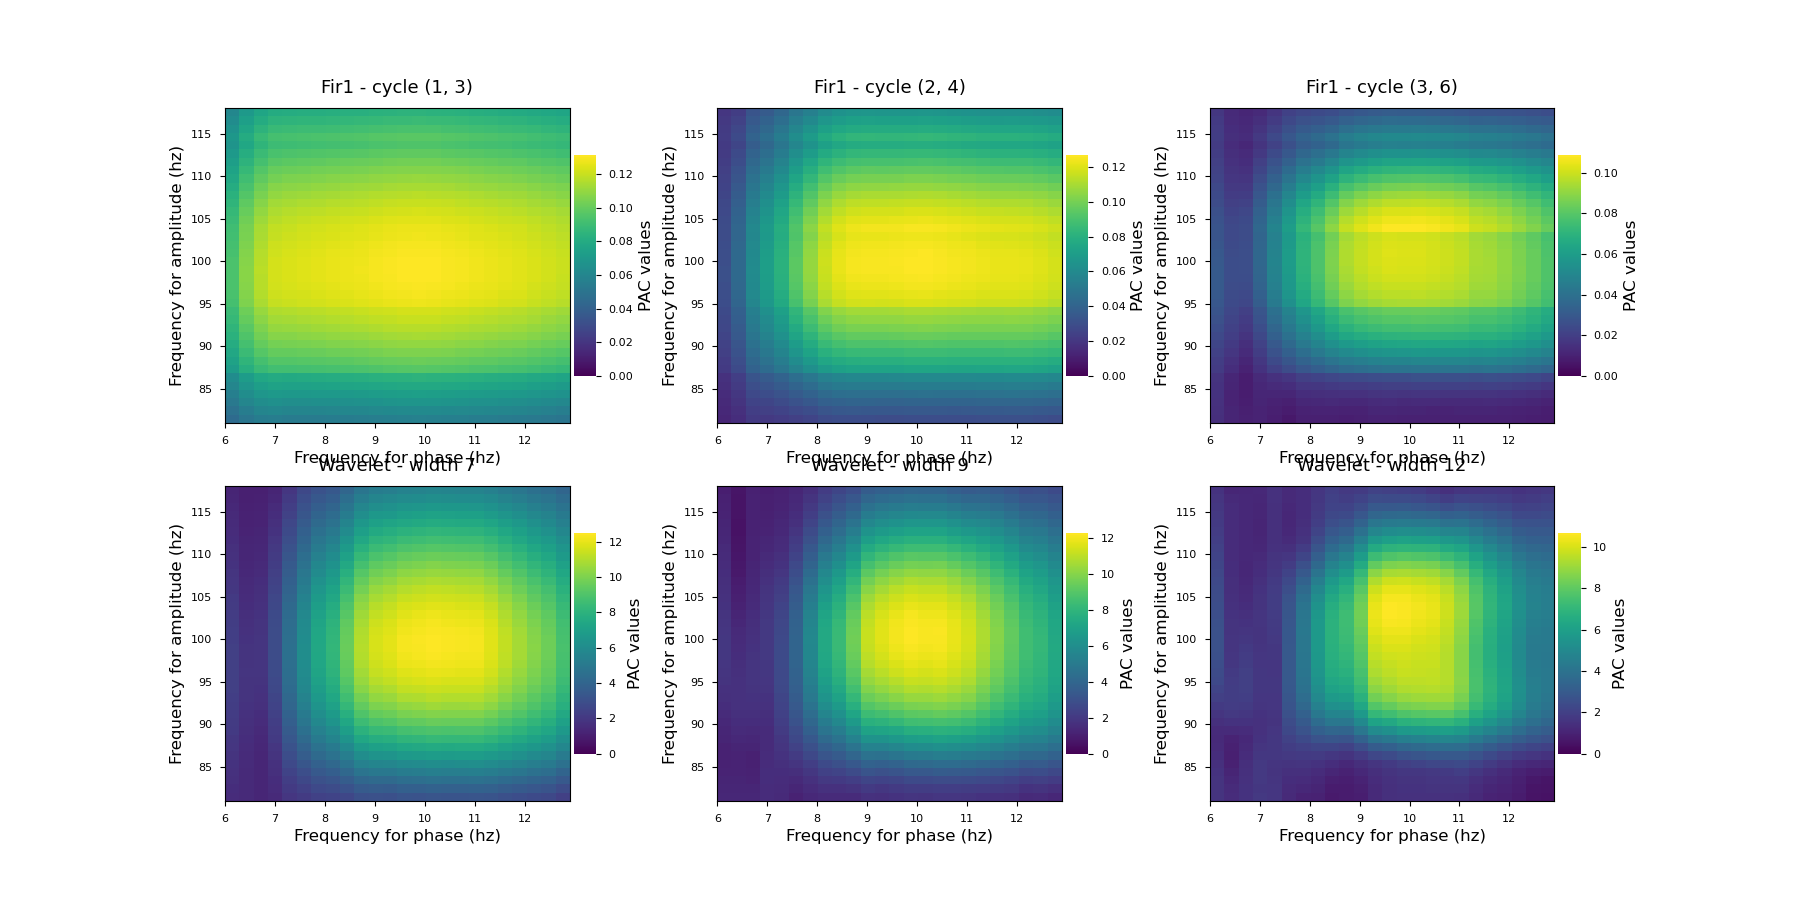 ../../_images/sphx_glr_plot_compare_filtering_001.png